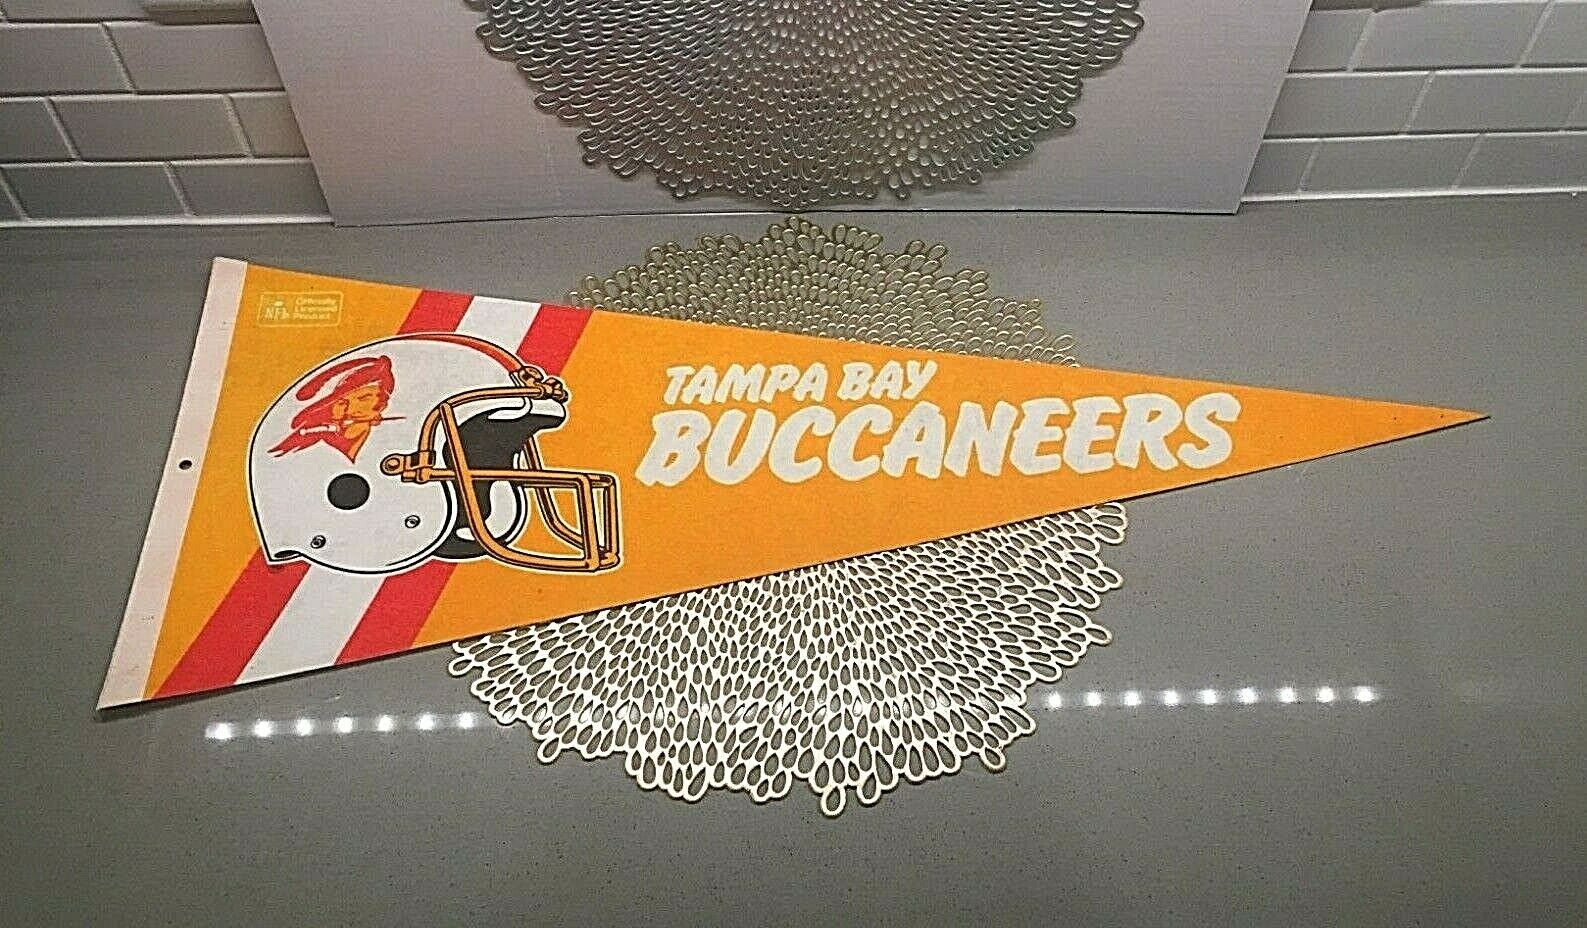 Vintage 1980s Tampa Bay Buccaneers NFL Football Pennant Full Size Man Cave